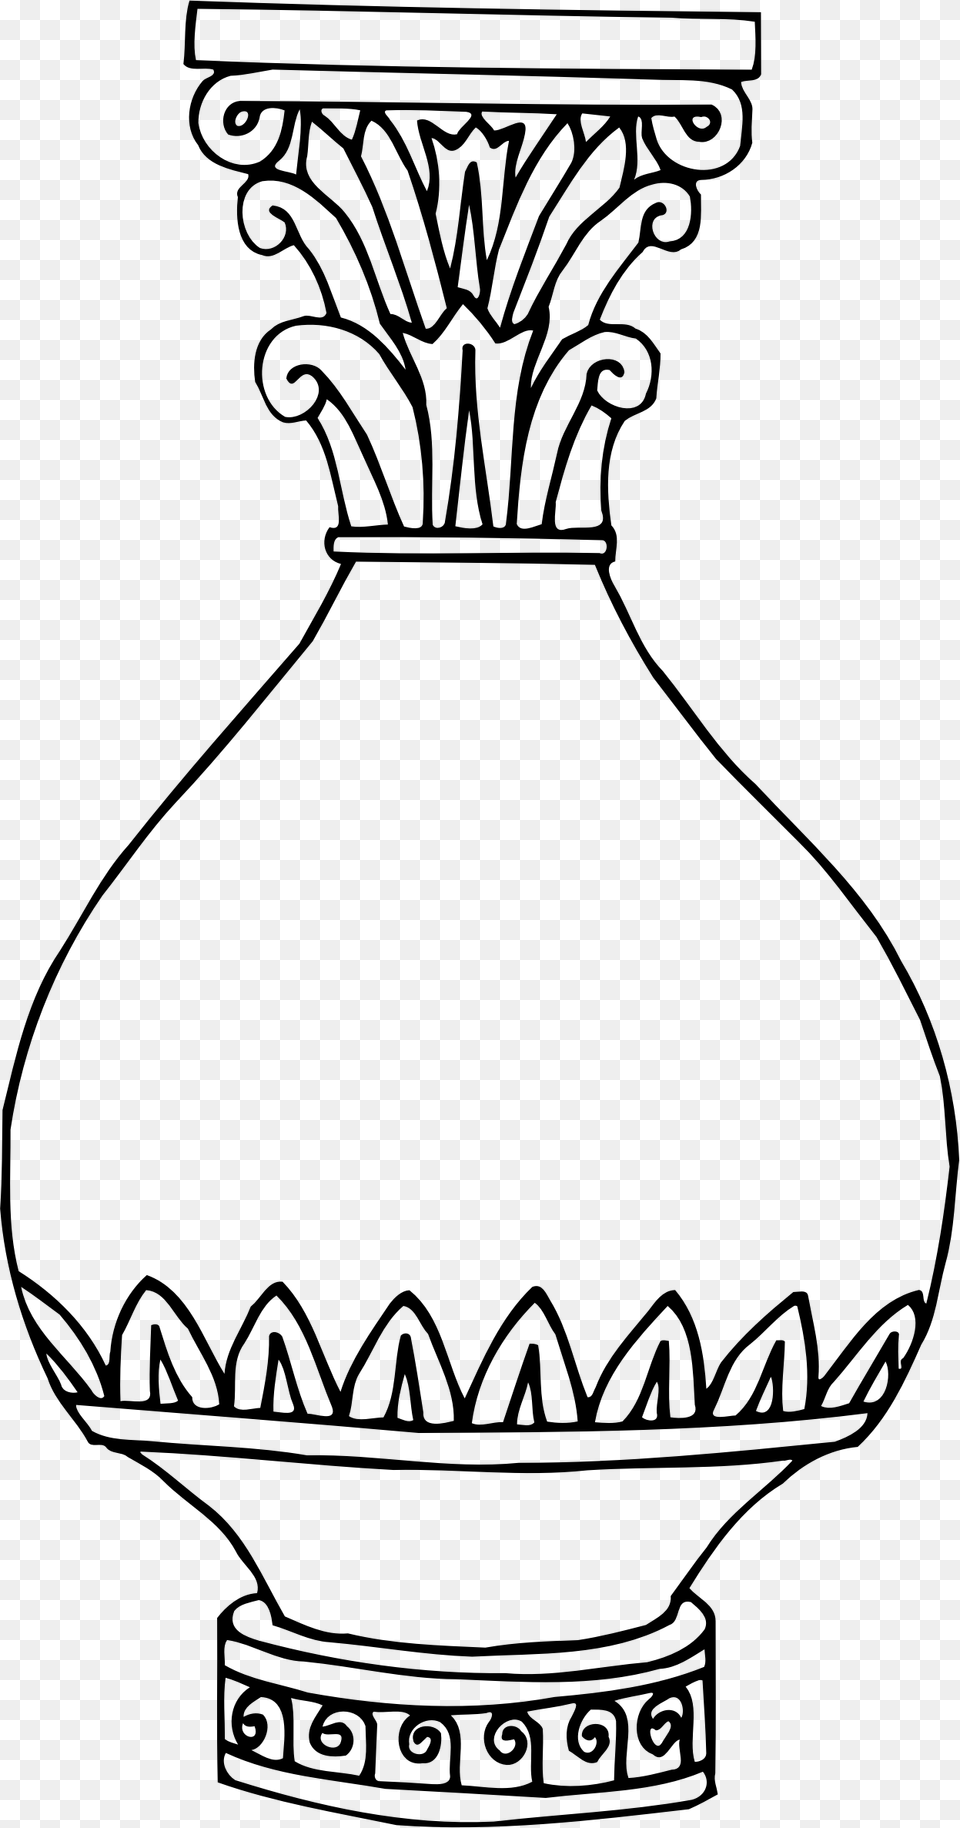 Vase Clipart Line Drawing Black And White Drawings Of Vase, Gray Free Transparent Png